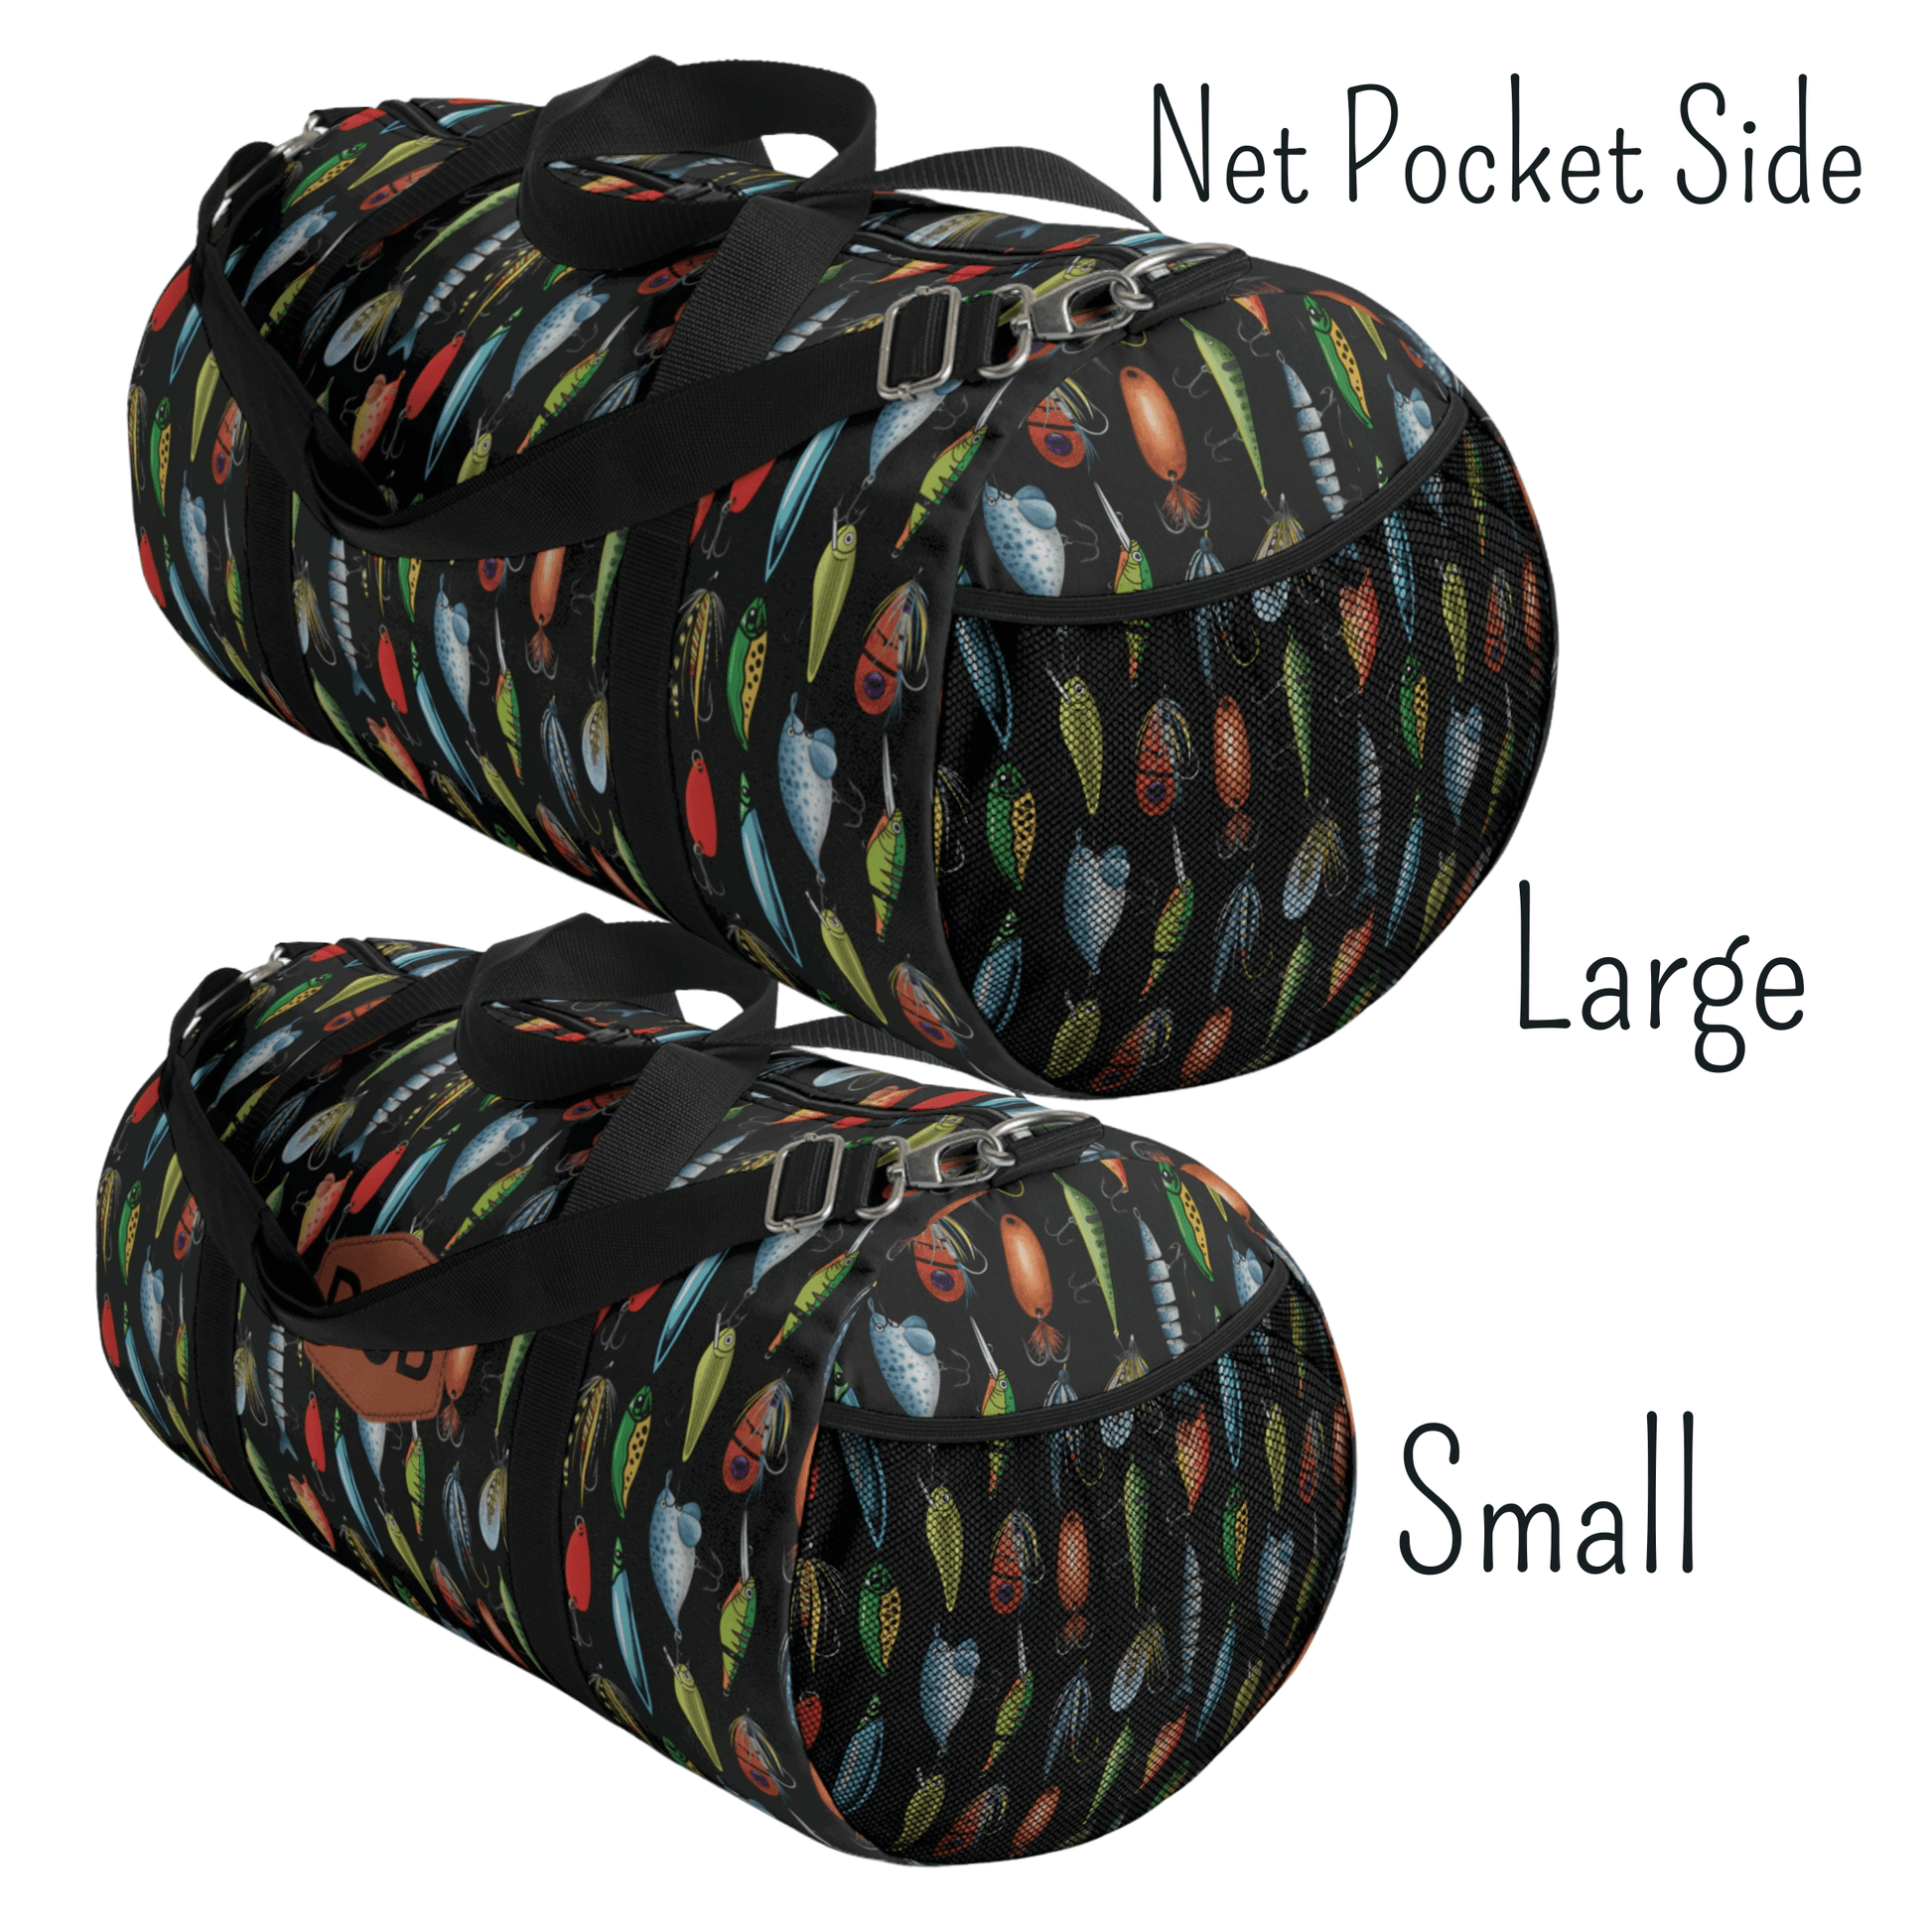 One side of our fishing duffel bag shows a black netted side pocket for extra storage. This picture shows the large and small weekender bag with the metal clasps for the shoulder straps.